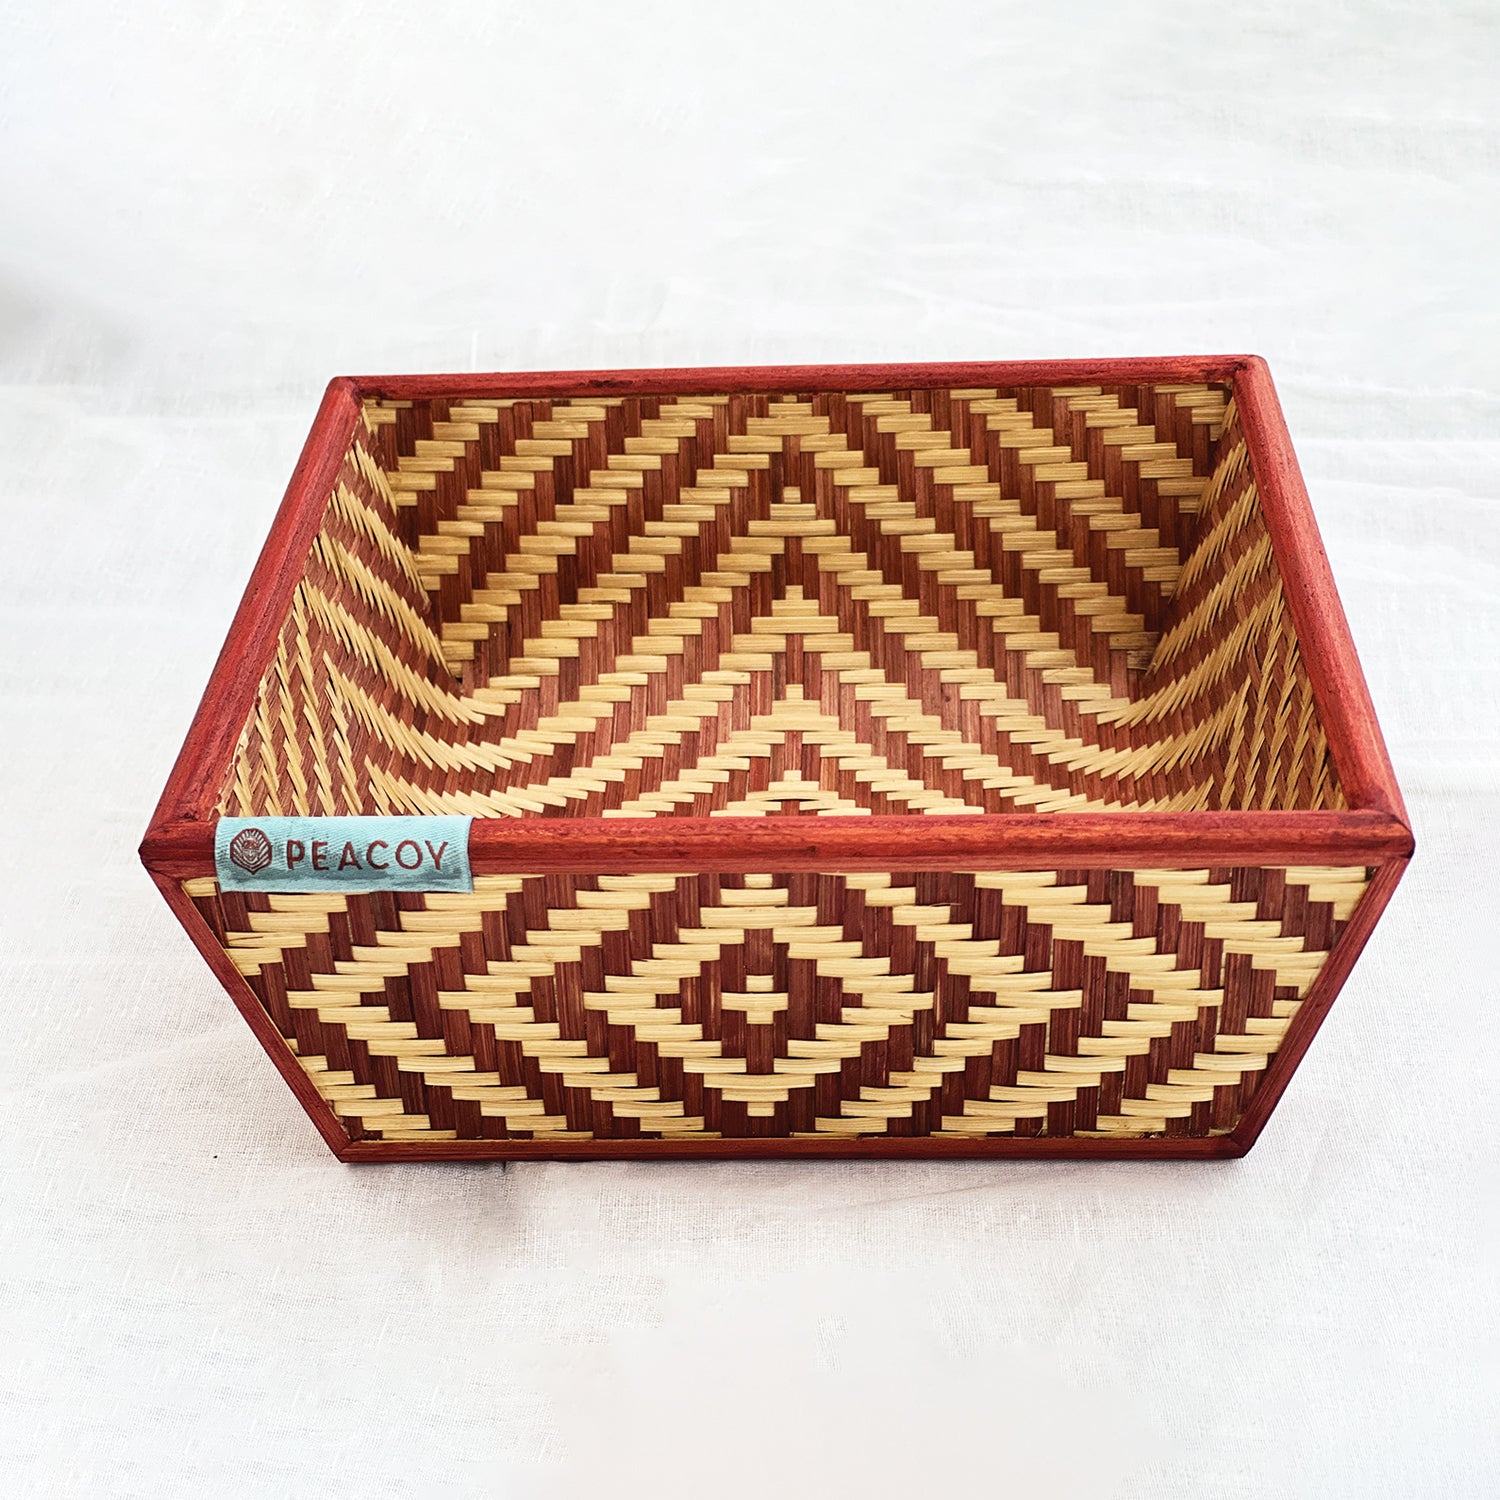 Artistic Brown Bamboo Fruit Basket - 8 x 8 x 4 inches